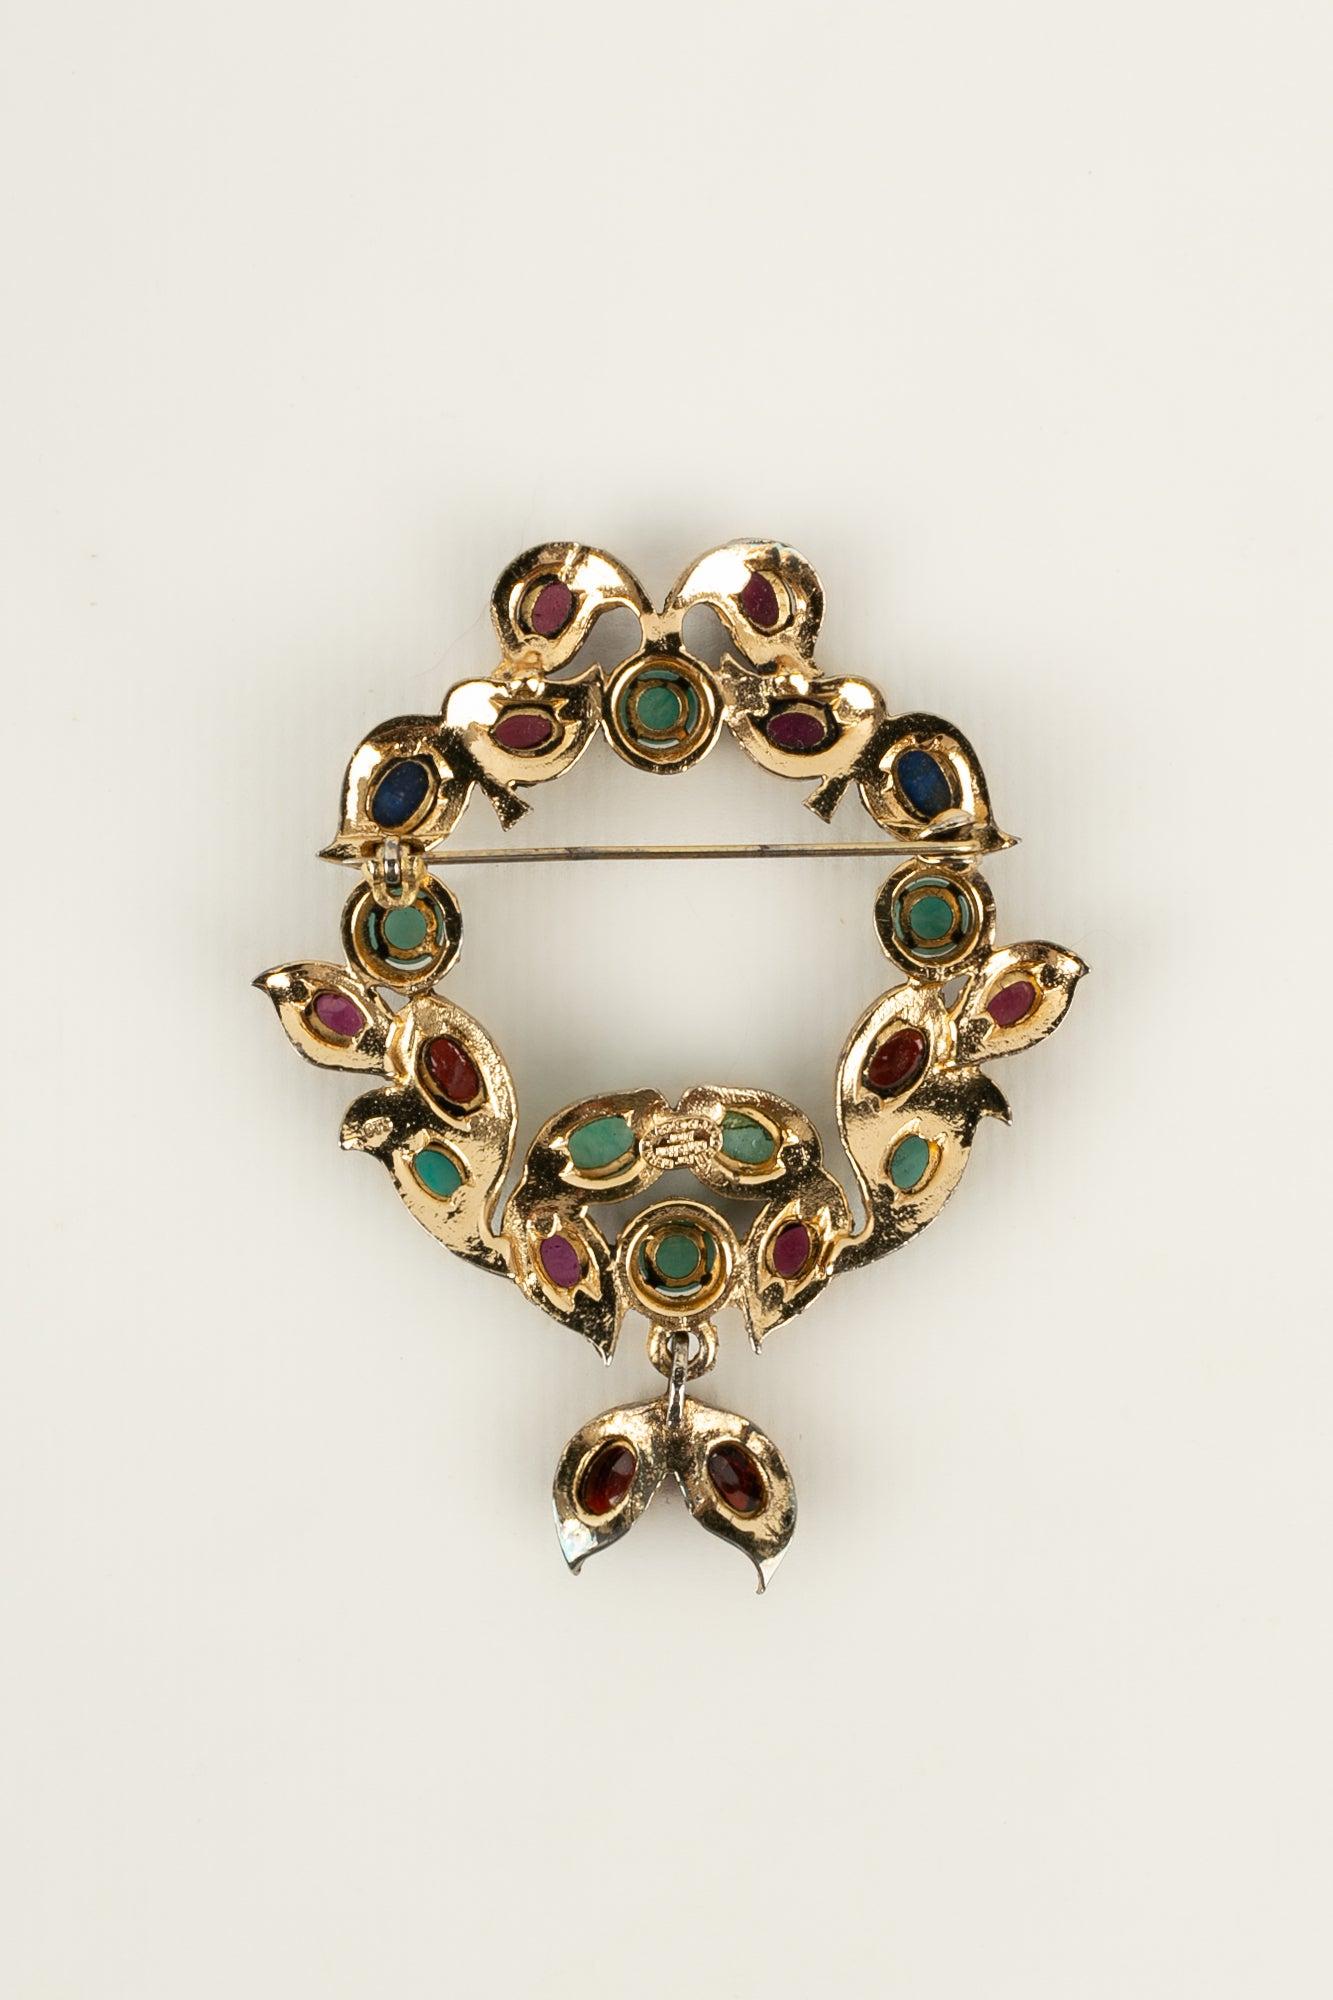 Dior - (Made in Germany) Brooch in gold-plated metal with cabochons in glass paste.

Additional information:
Condition: Very good condition
Dimensions: 7 cm x 5.5 cm

Seller Reference: BR83
